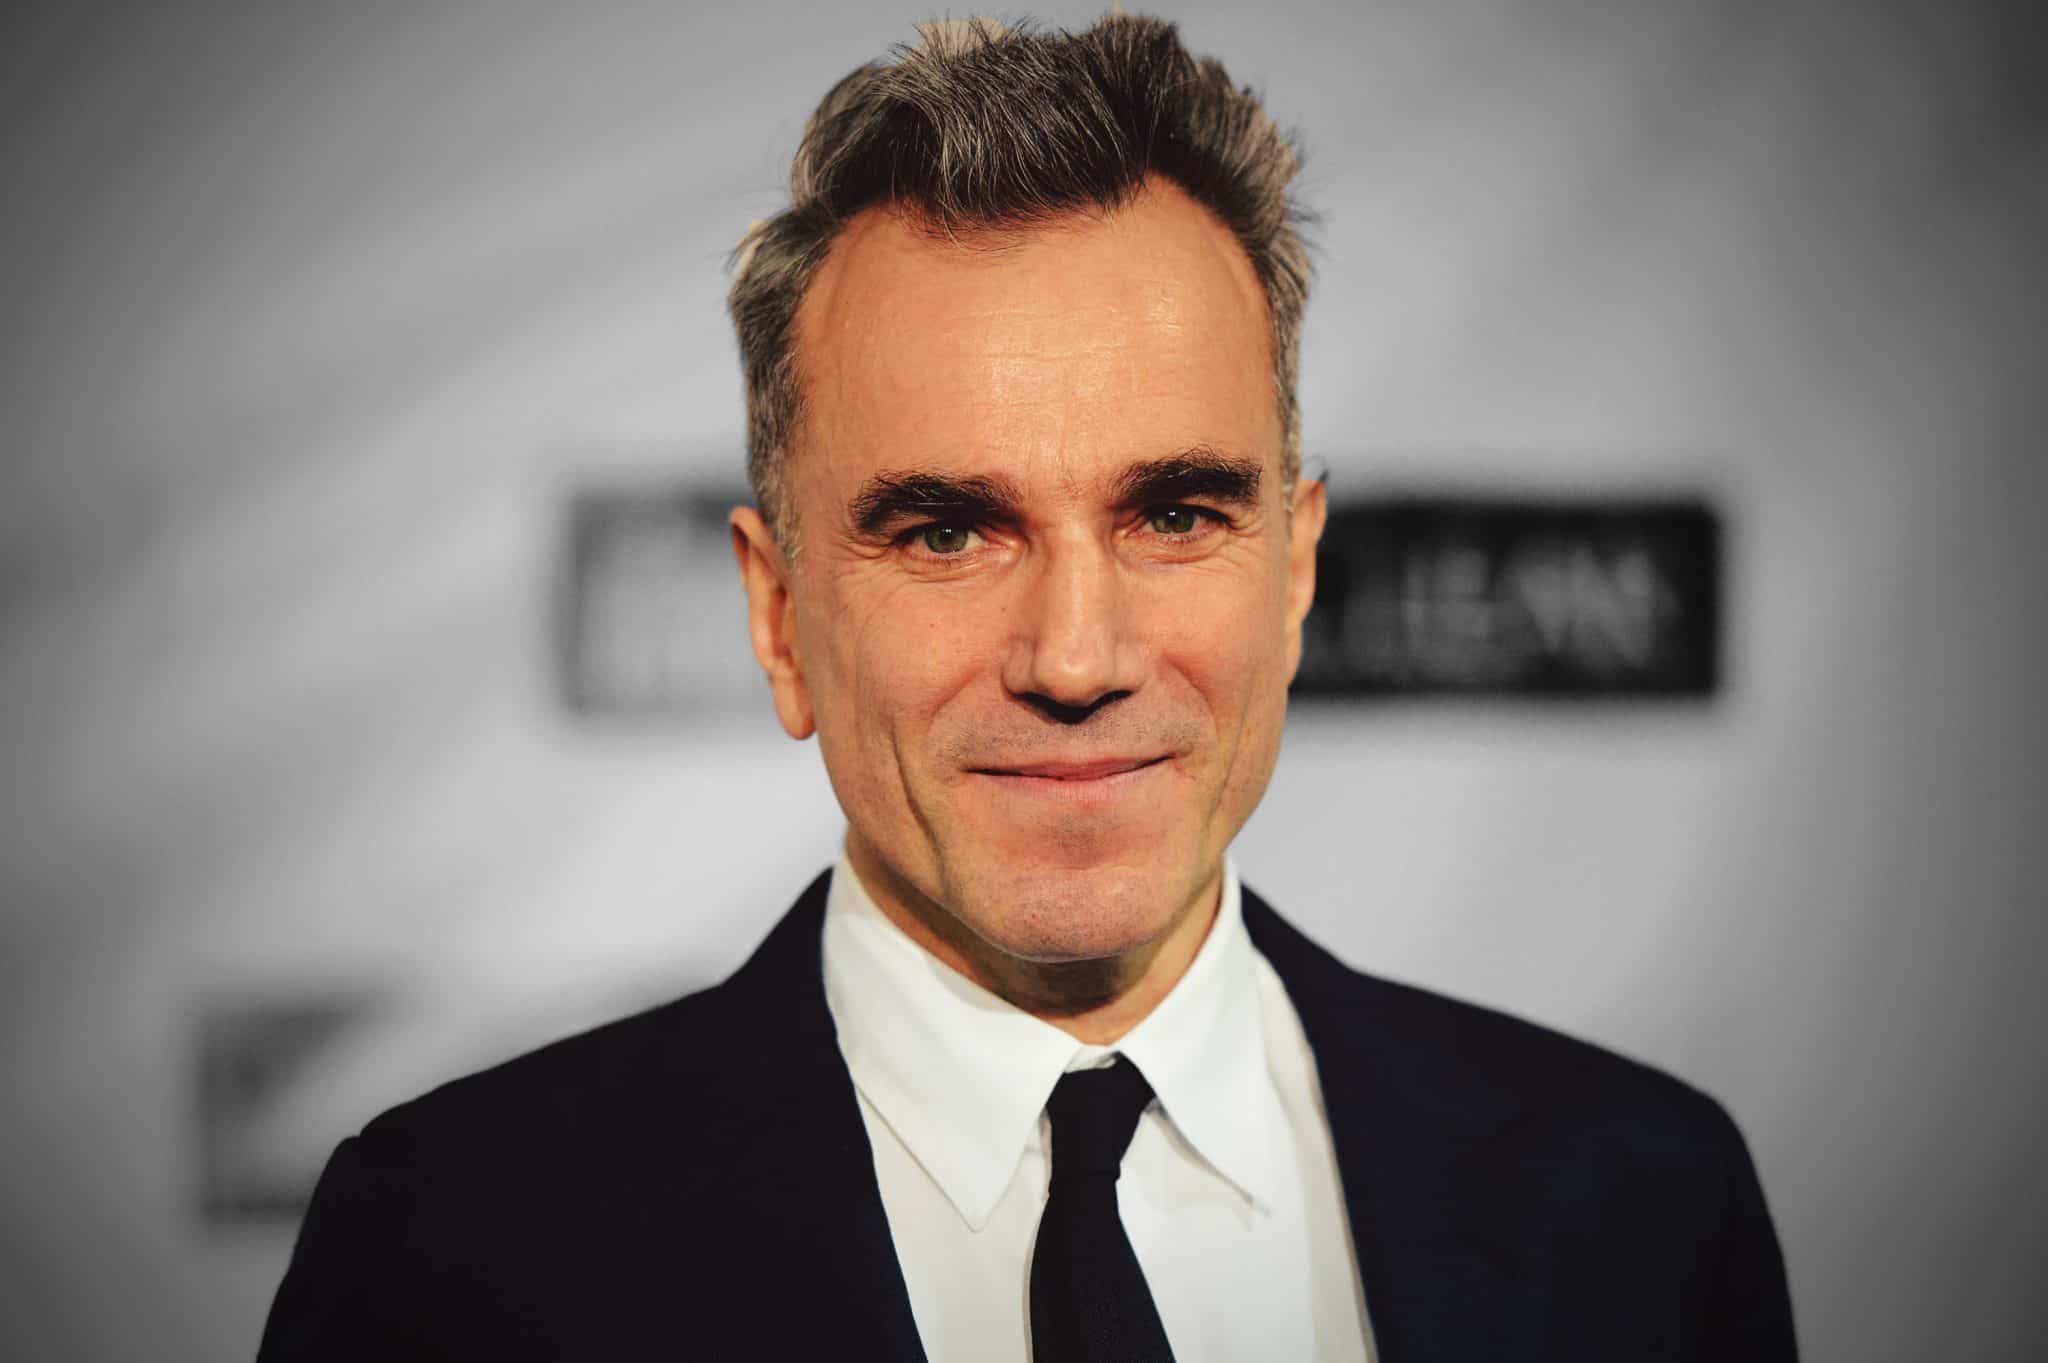 The Actor Who Plays Daniel Day-Lewis Announces His Retirement From The Character